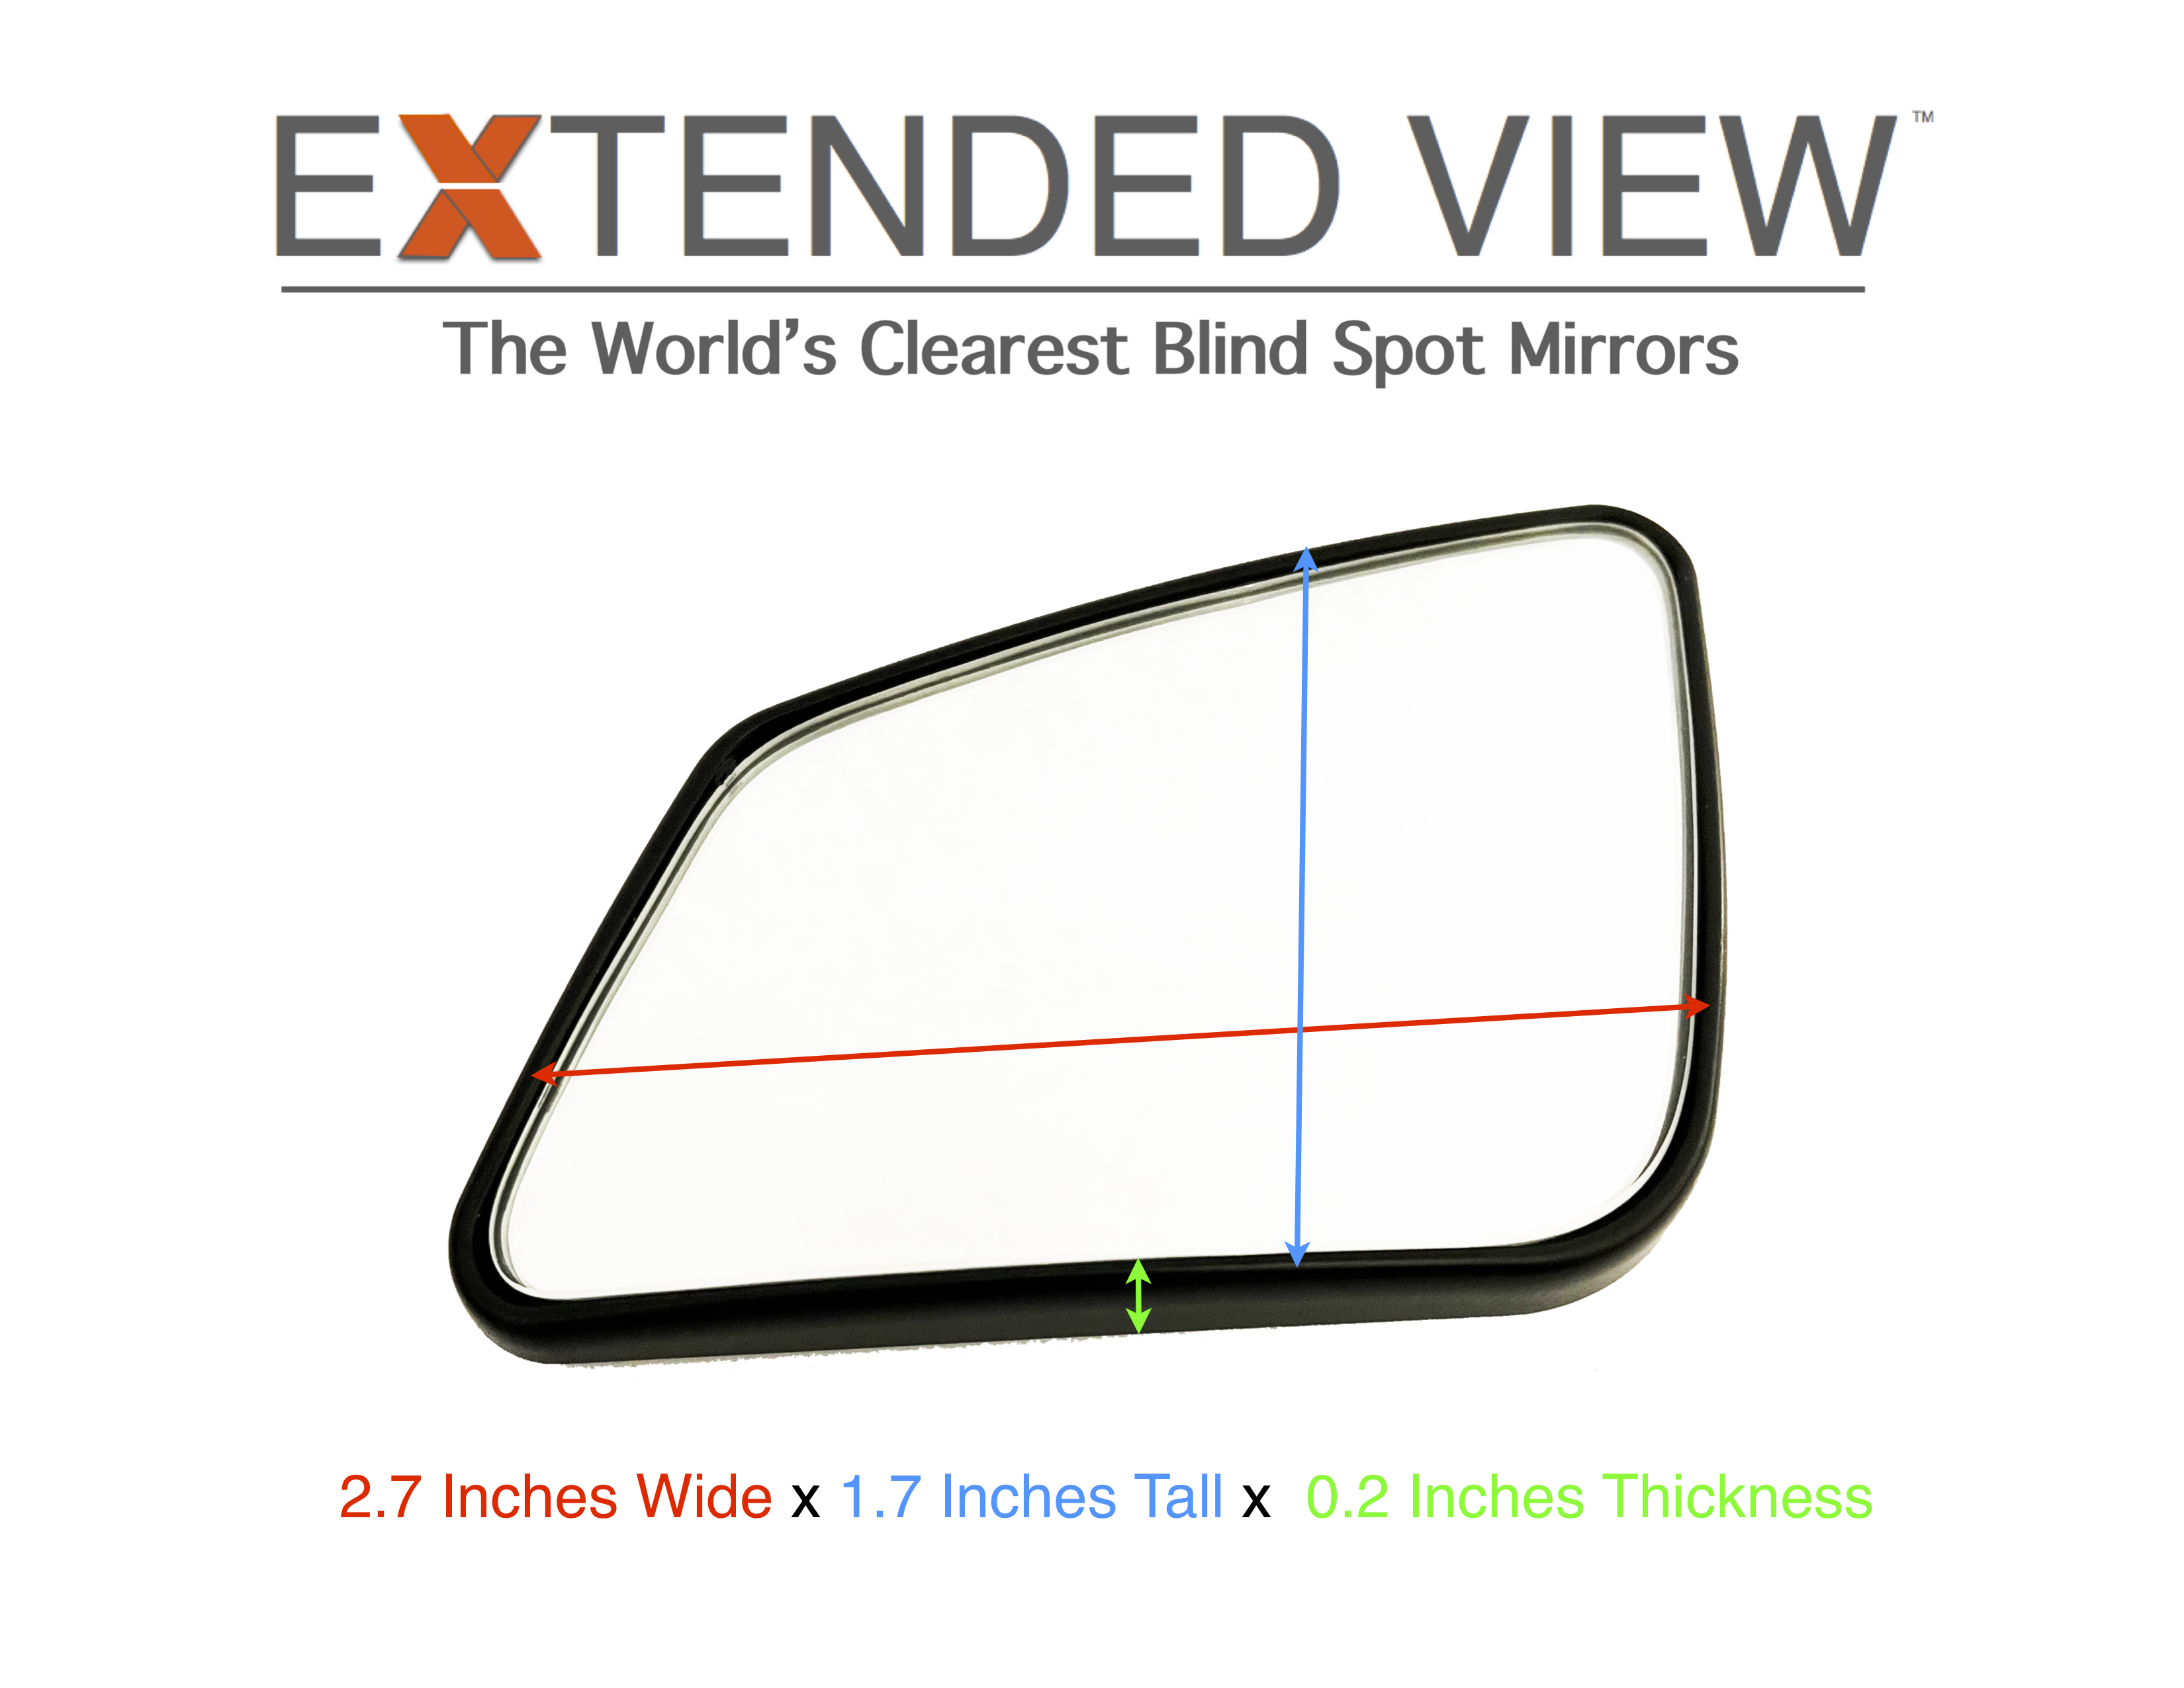 BMW 5 Series Blind Spot Mirrors | F11 Extended View™